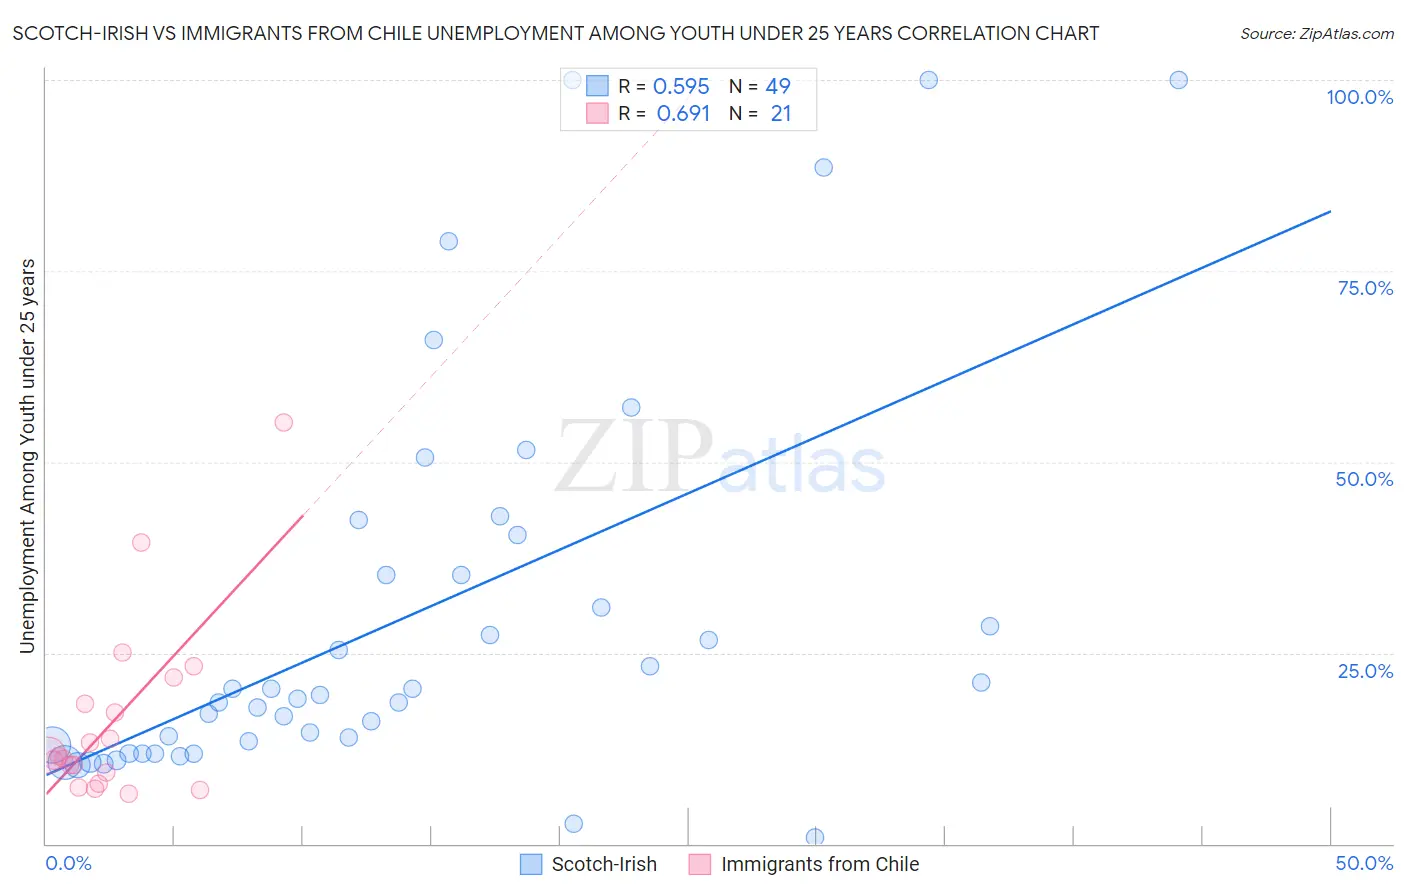 Scotch-Irish vs Immigrants from Chile Unemployment Among Youth under 25 years